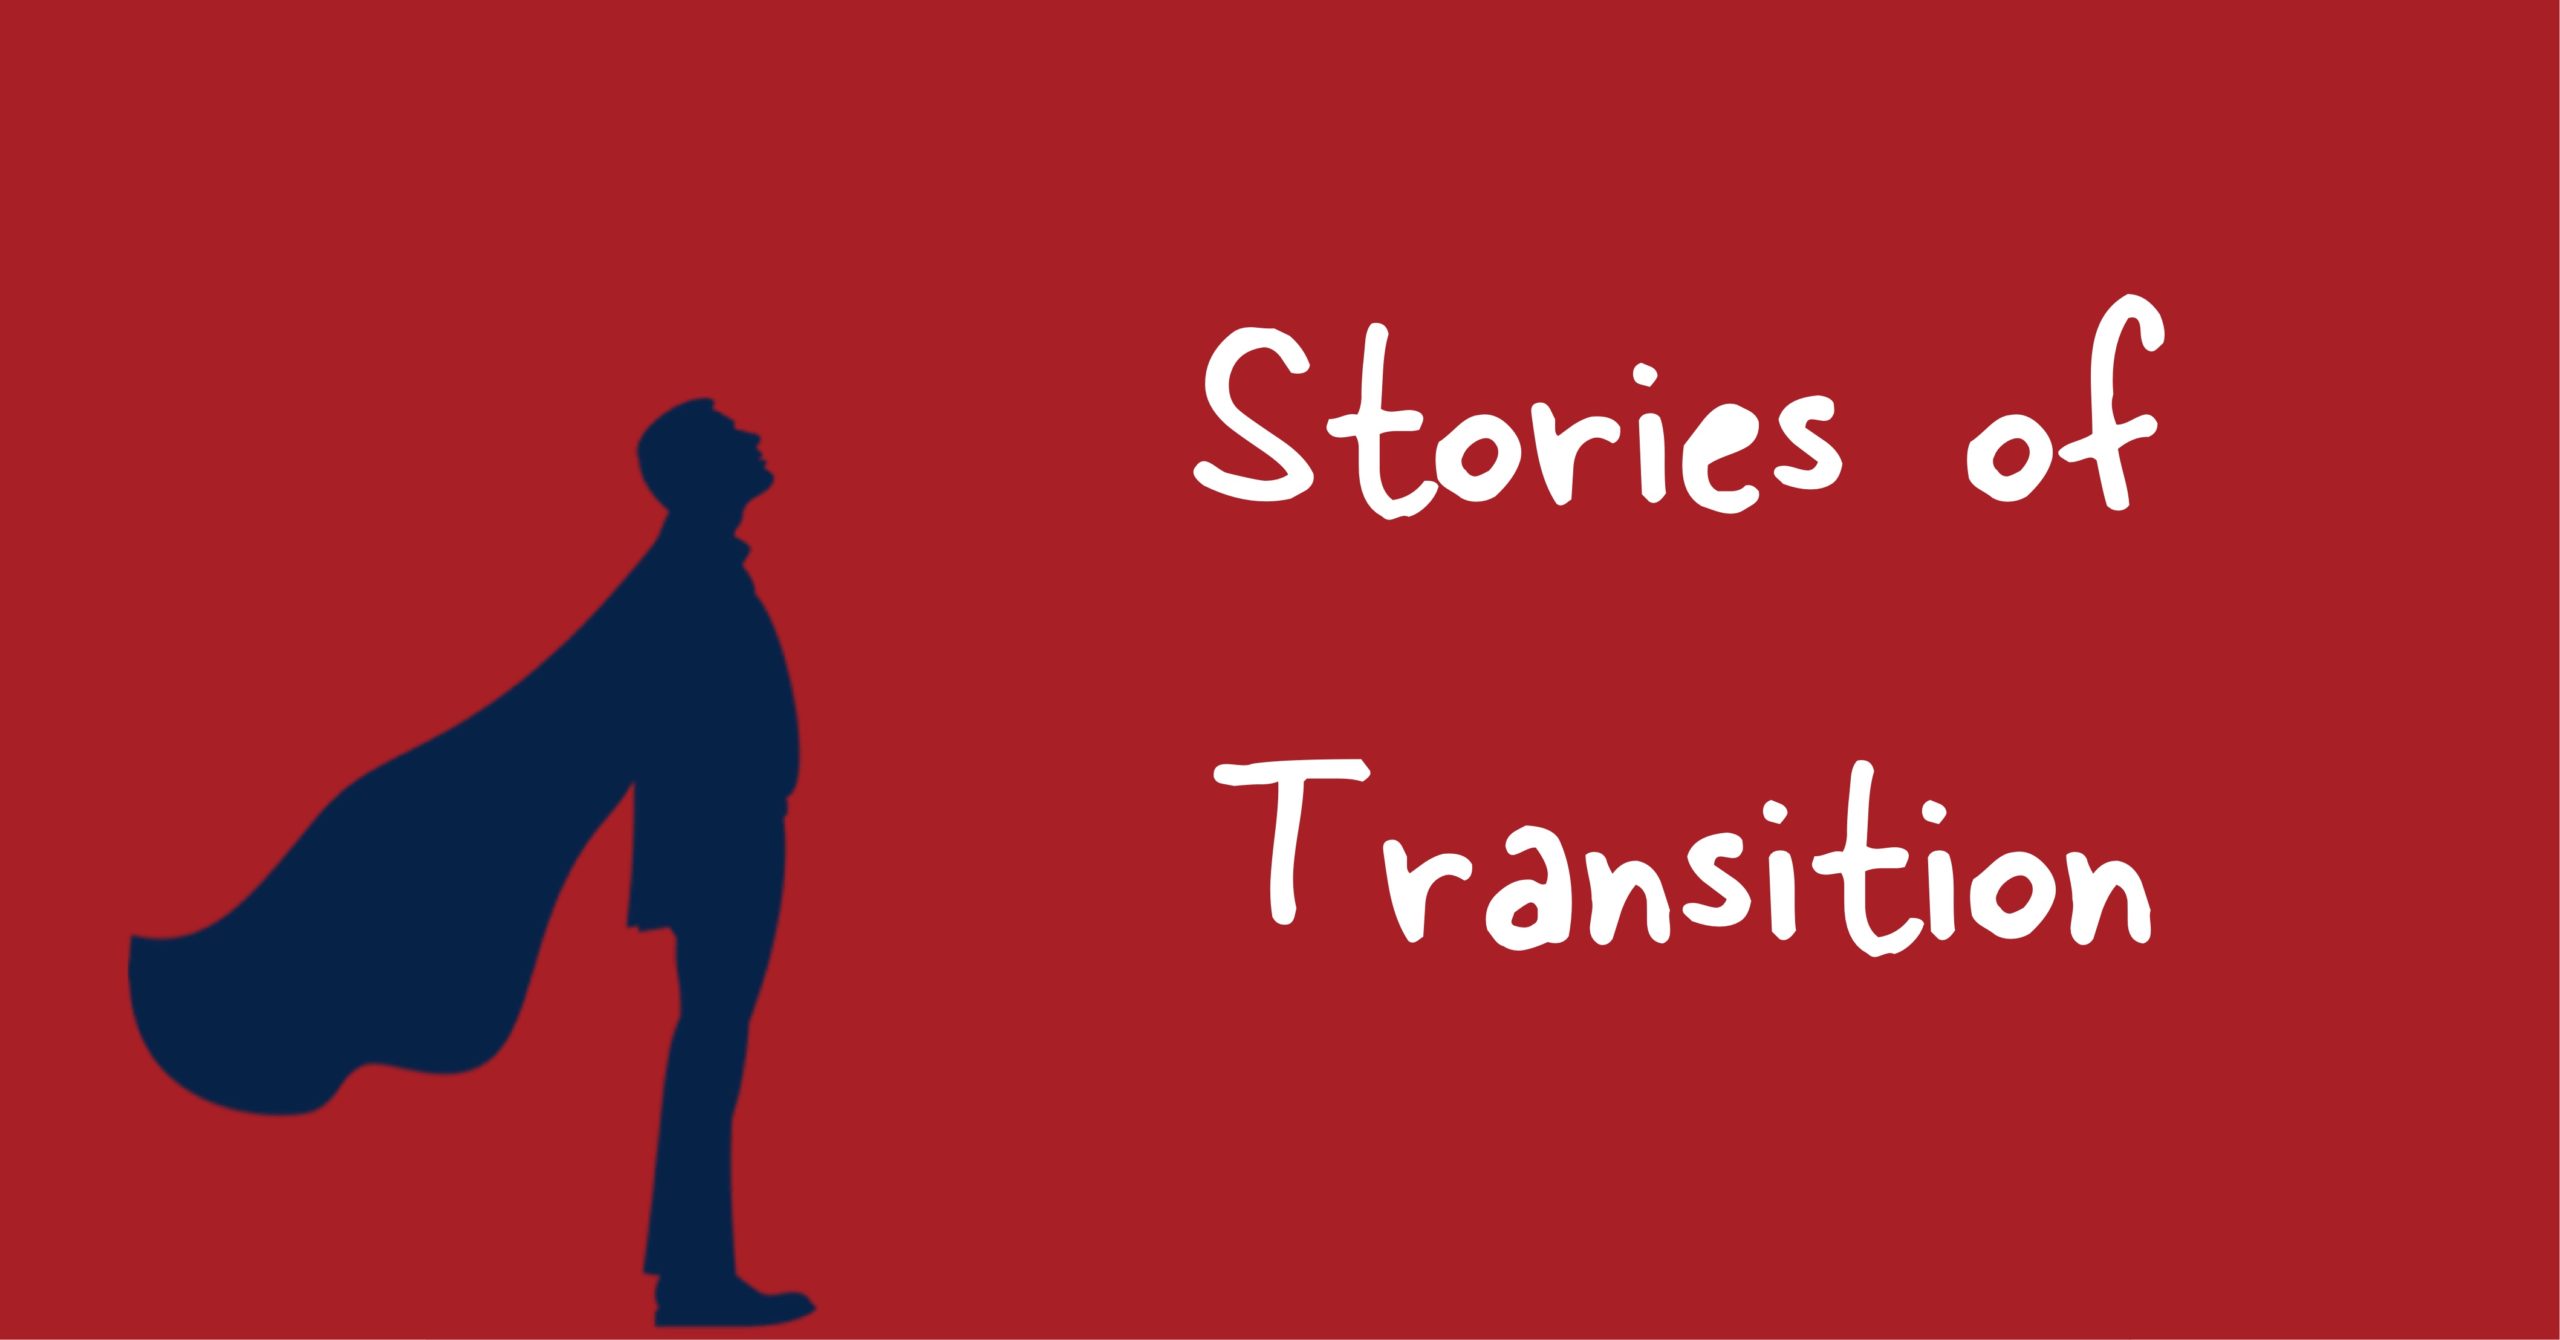 Stories of Transition